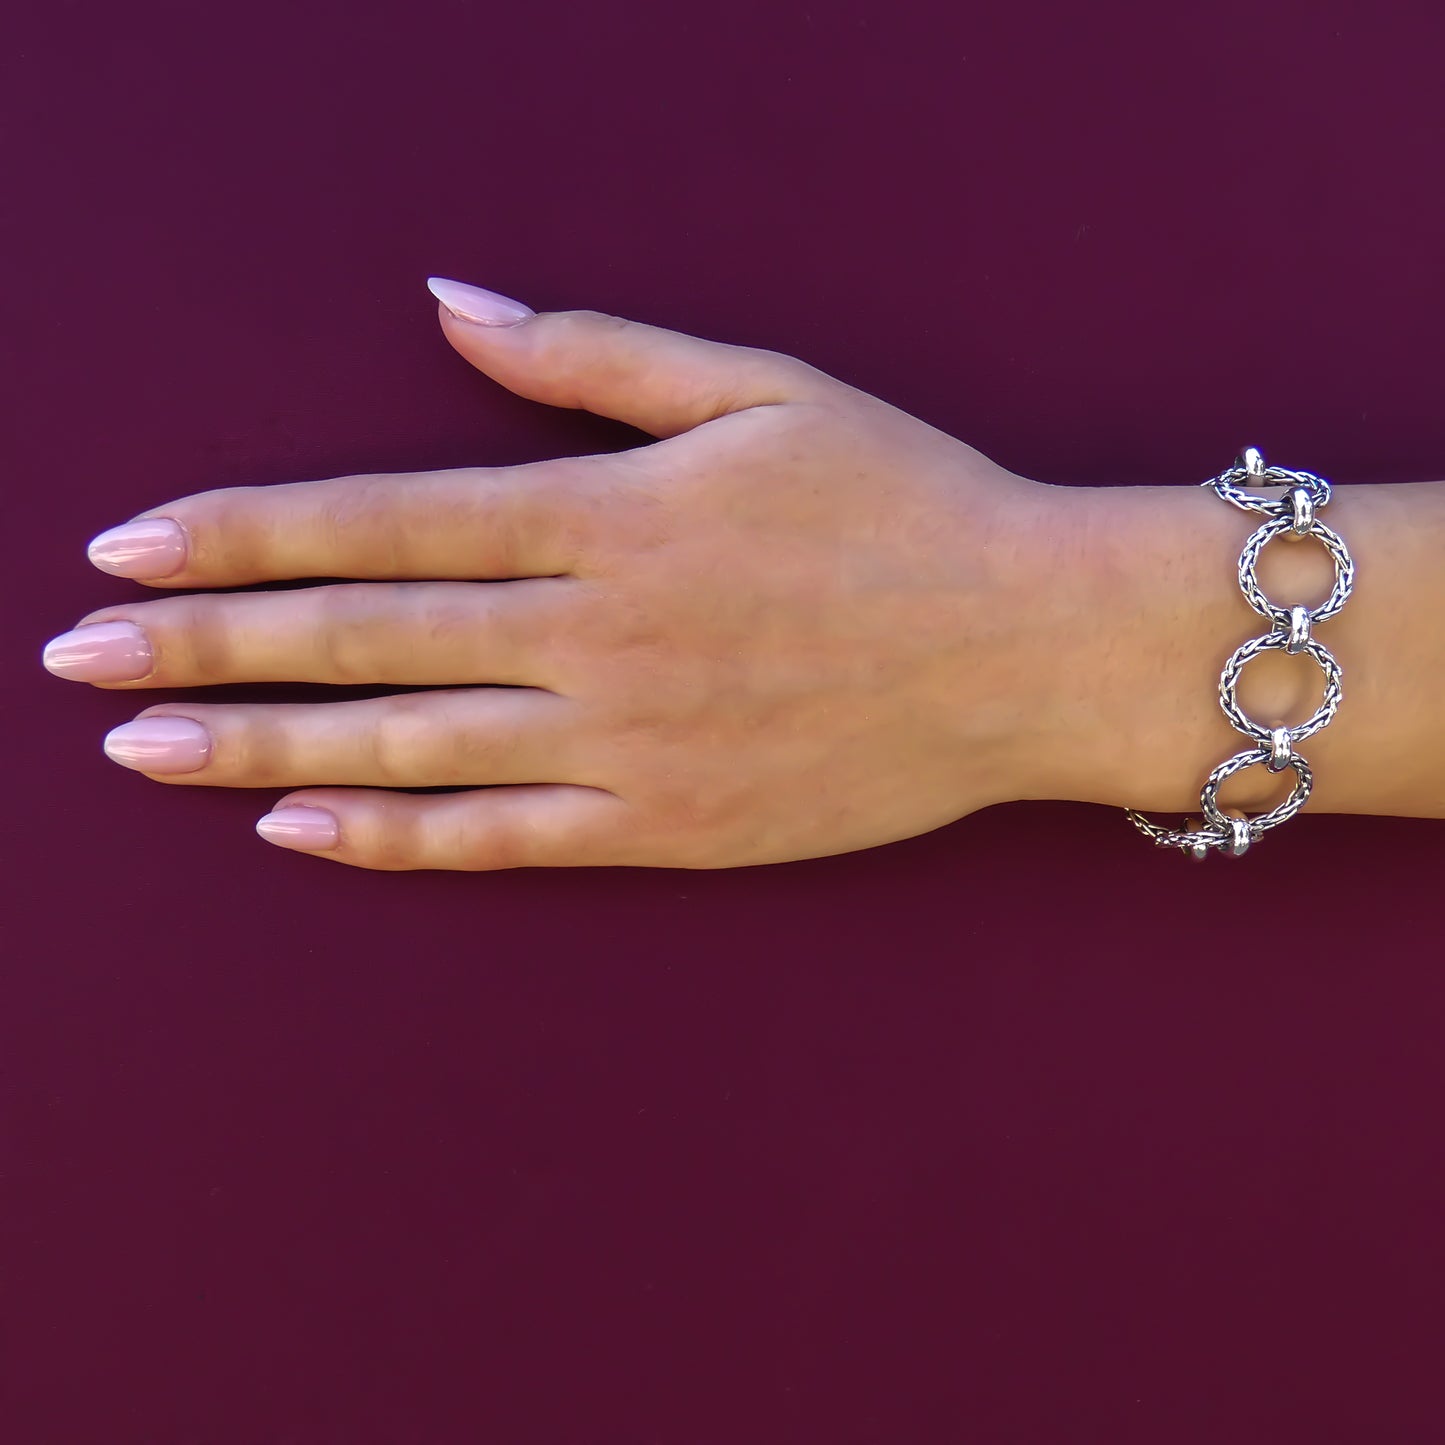 Woman wearing a silver bracelet made of wheat design ring links.